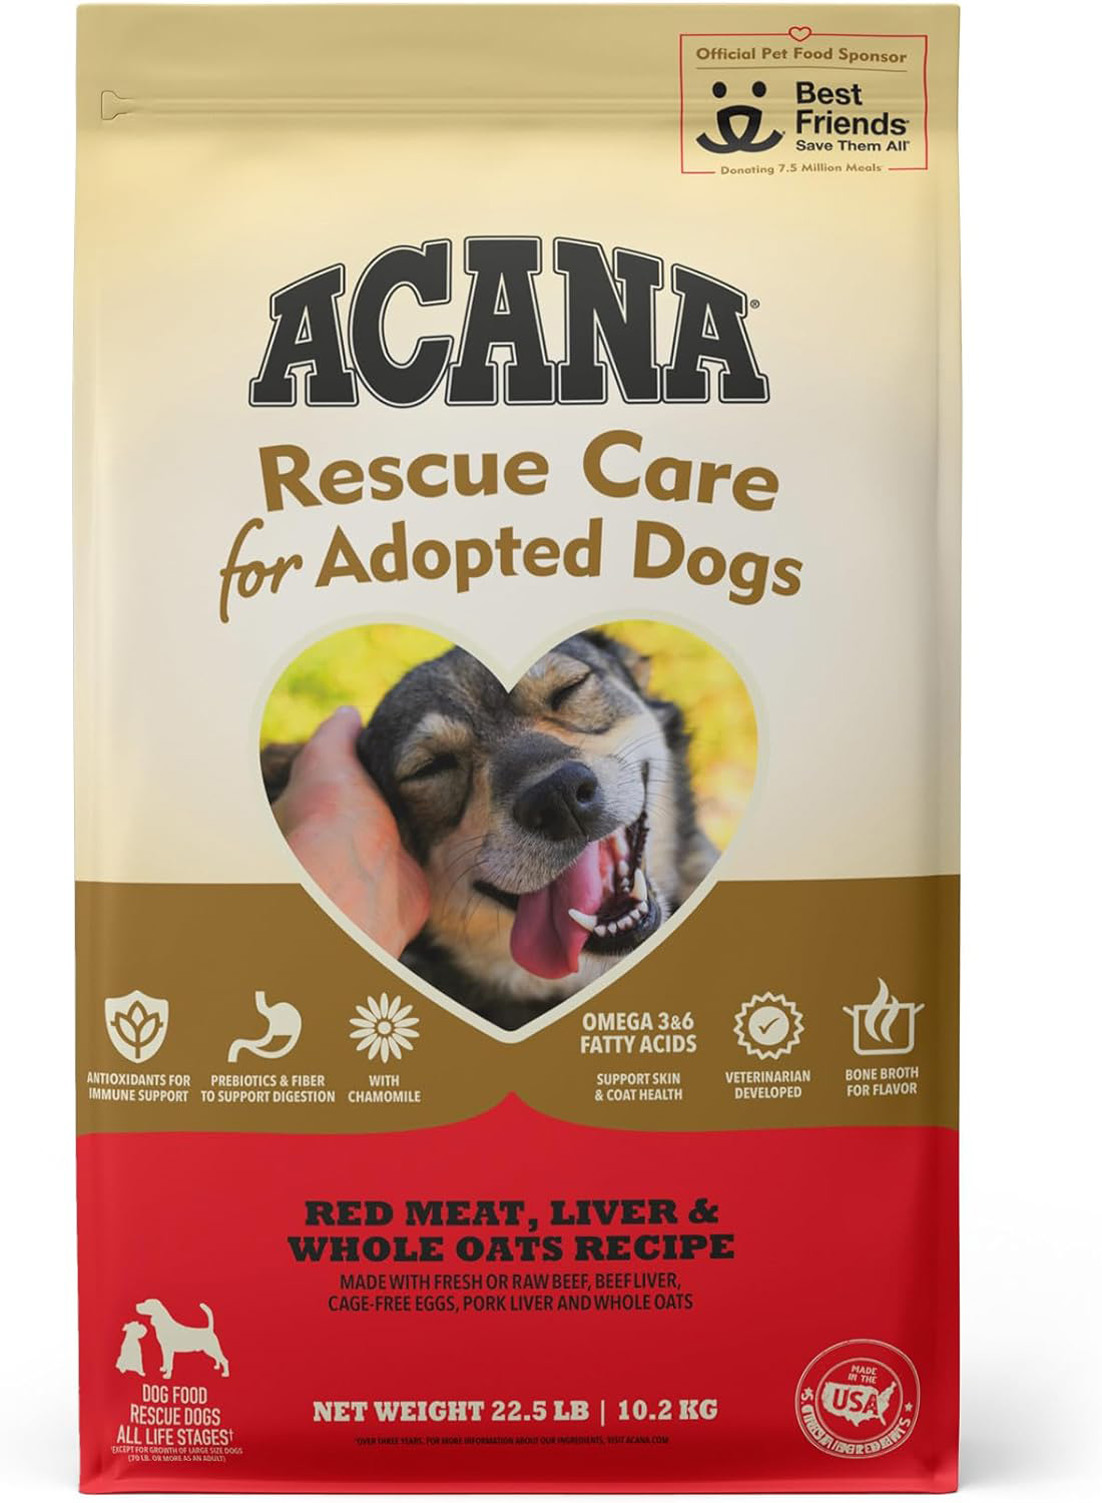 ACANA Rescue Care For Adopted Dogs Red Meat, Liver & Whole Oats Recipe Premium Dry Food, 22.5 lbs.